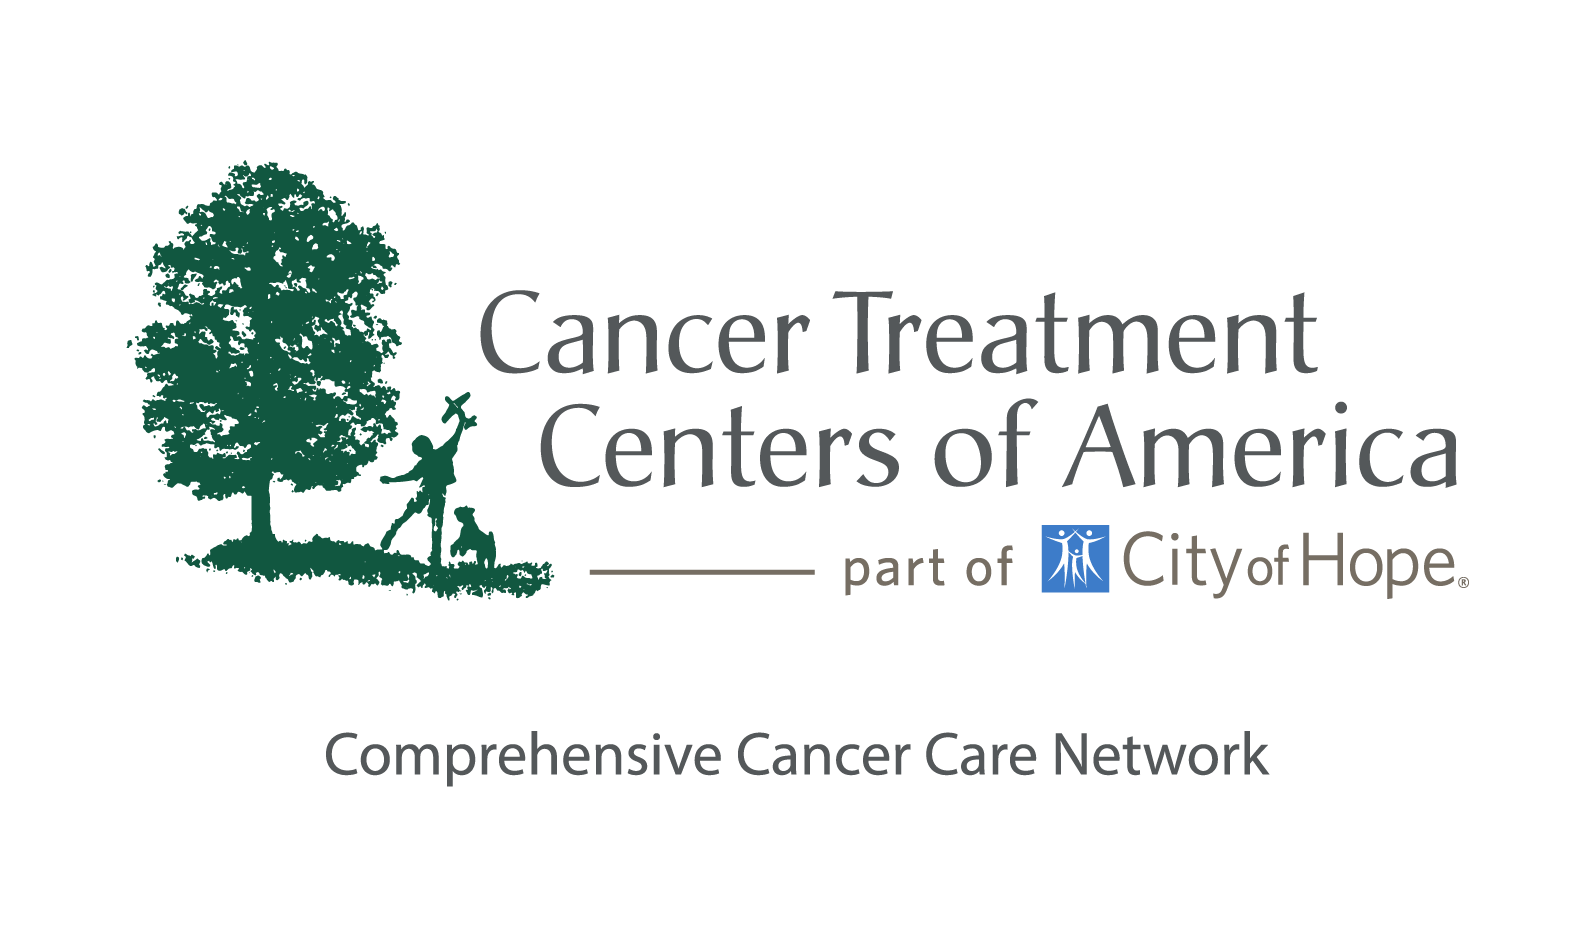 Cancer treatment centers of america